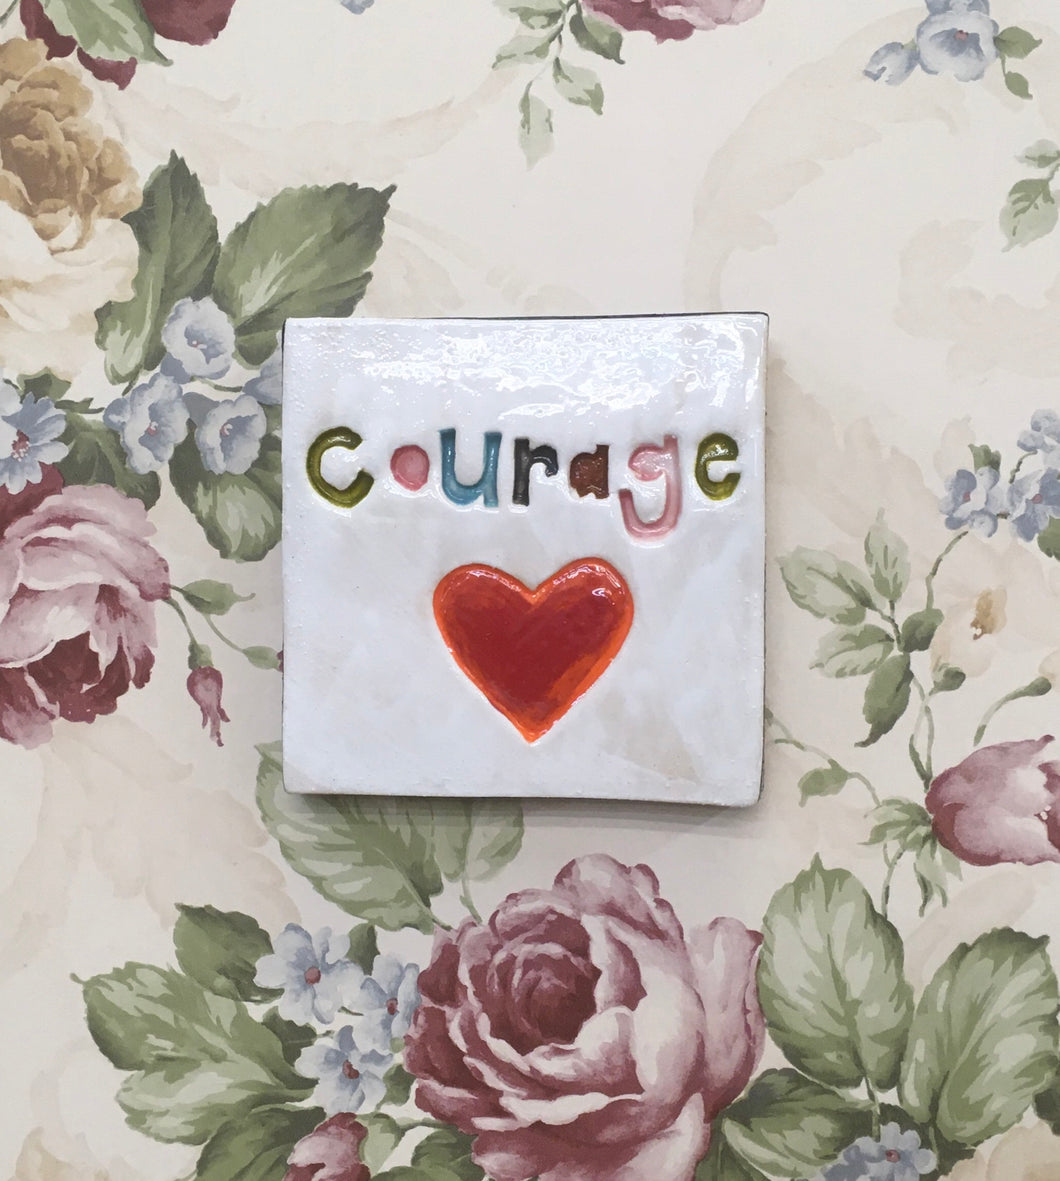 Courage tile